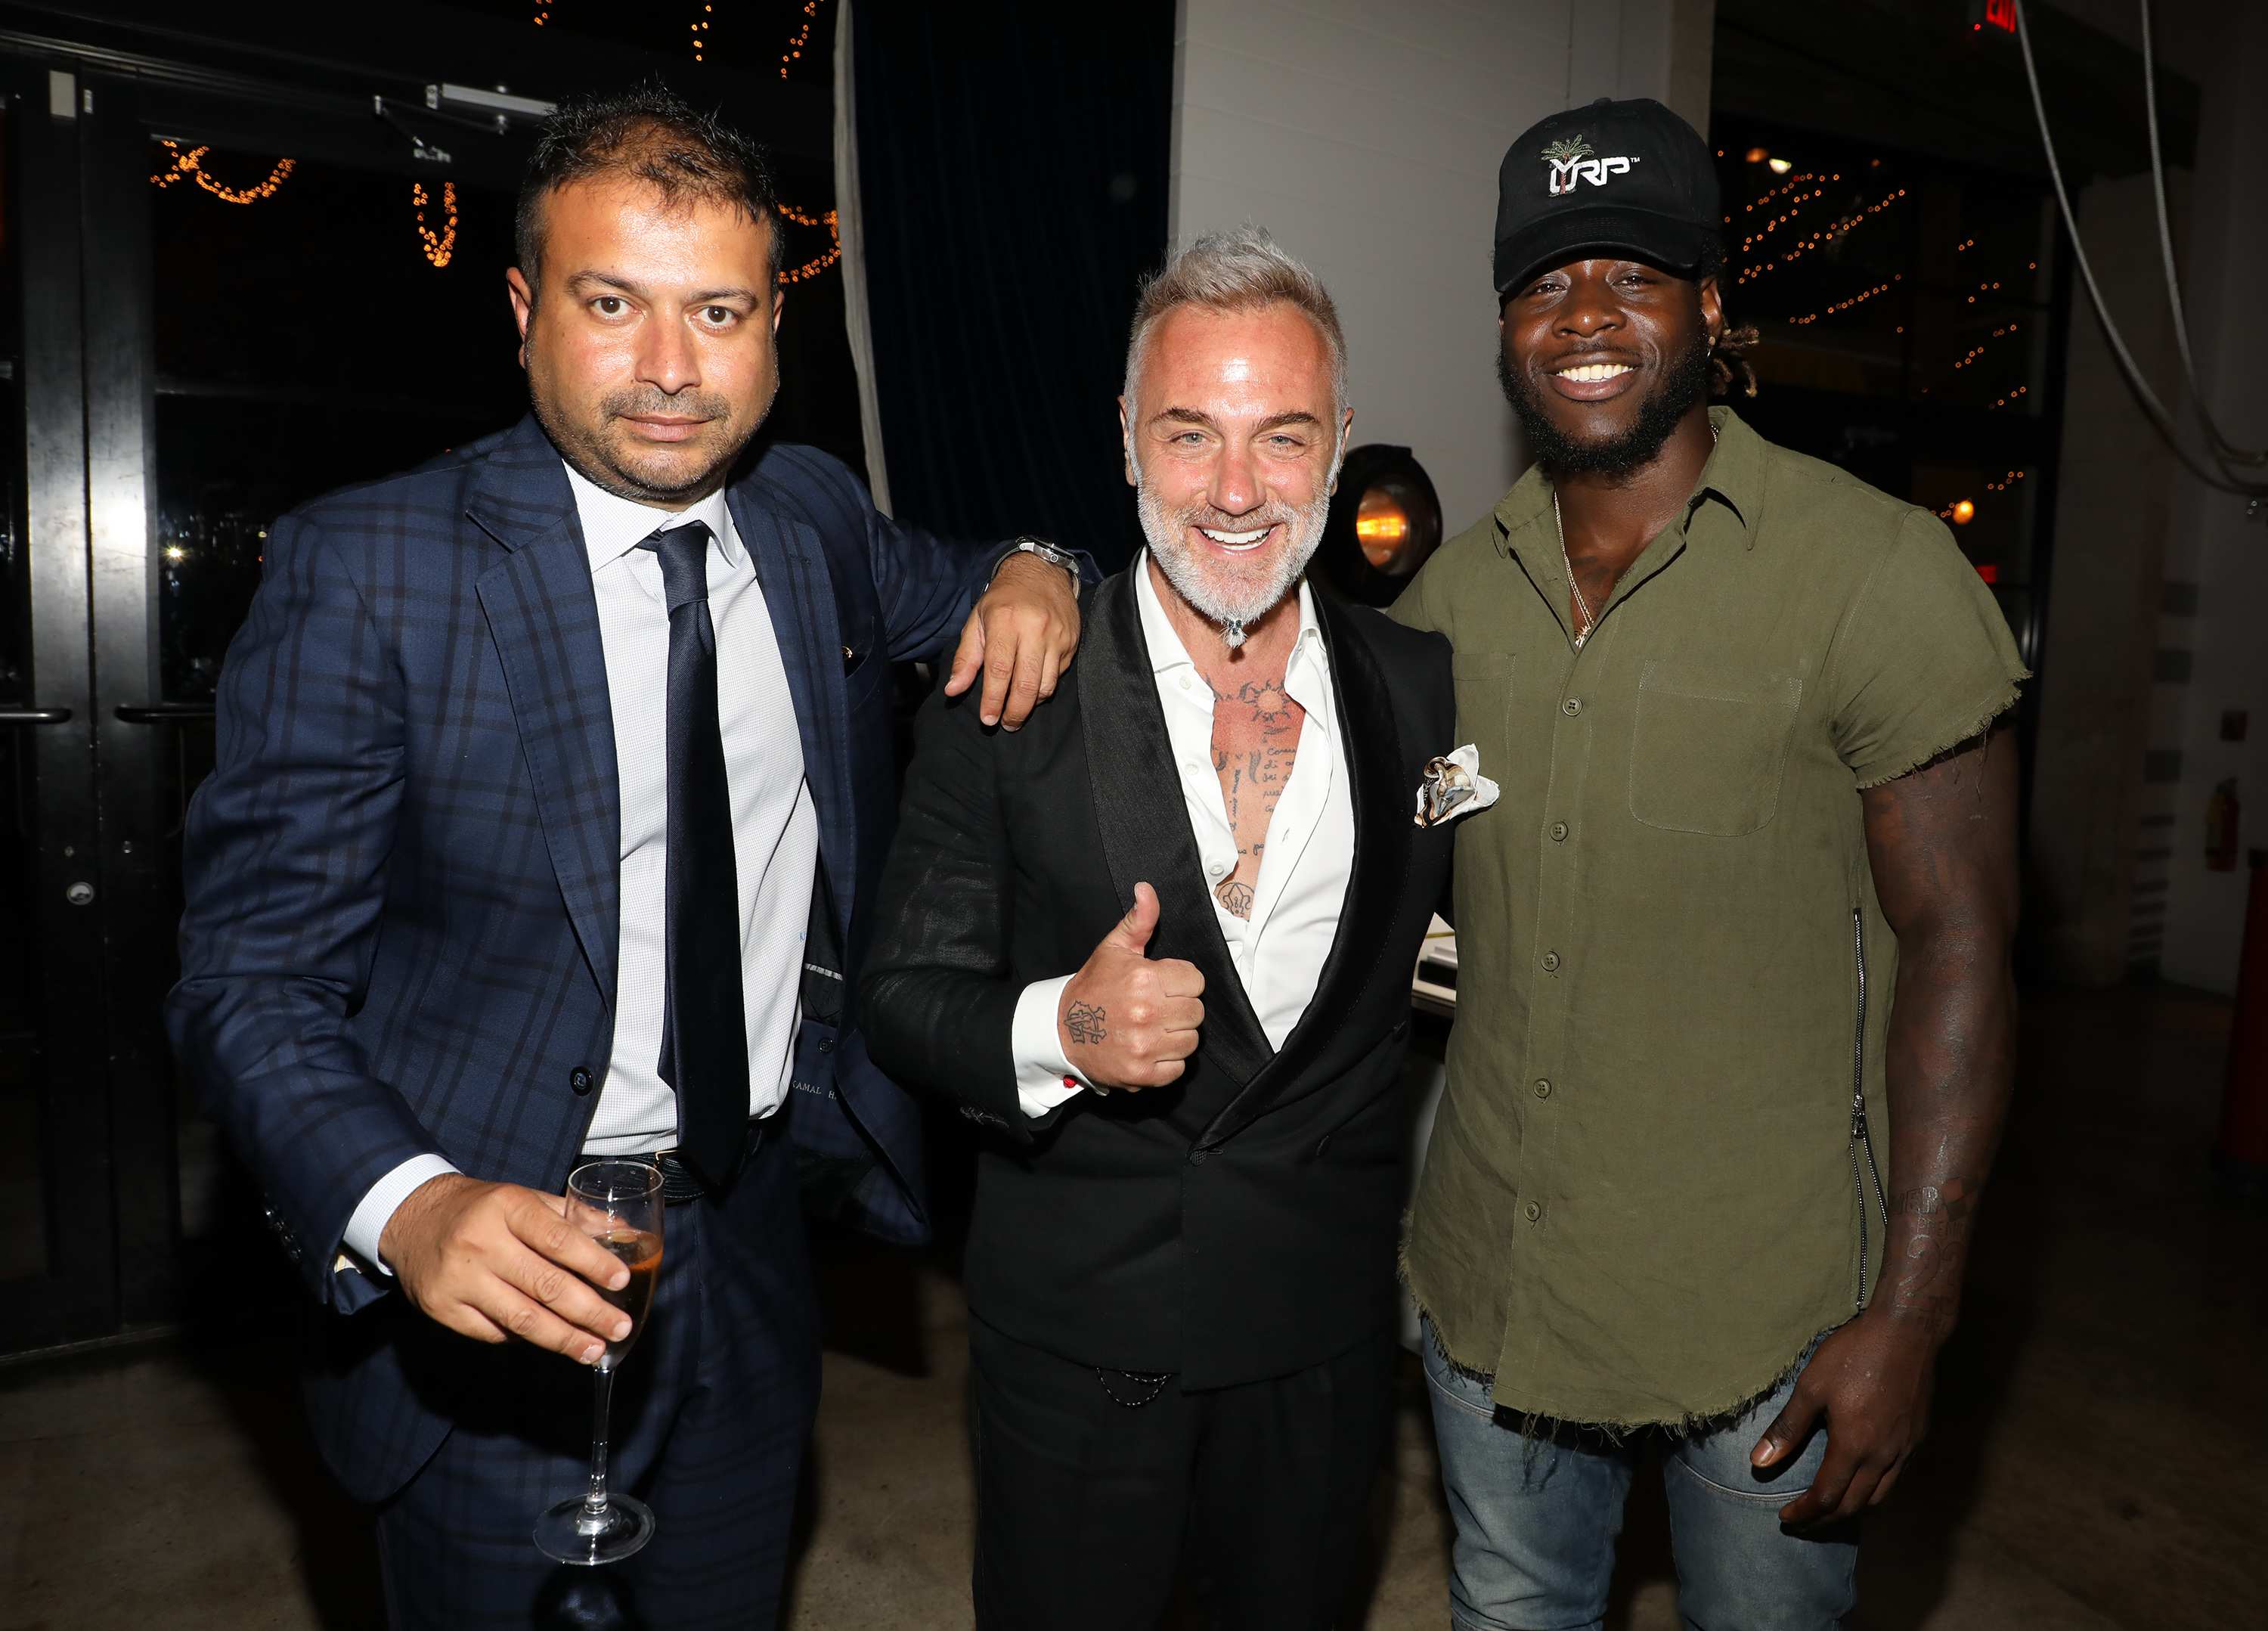 MIAMI, FL - APRIL 6: Kamal Hotchandani, Gianluca Vacchi and Jay Ajayi are seen at the Haute Living and Ulysse Nardin Collectors Dinner at Seaspice on April 6, 2017 in Miami, Florida. (Photo by Alexander Tamargo/Getty Images for Haute Living)